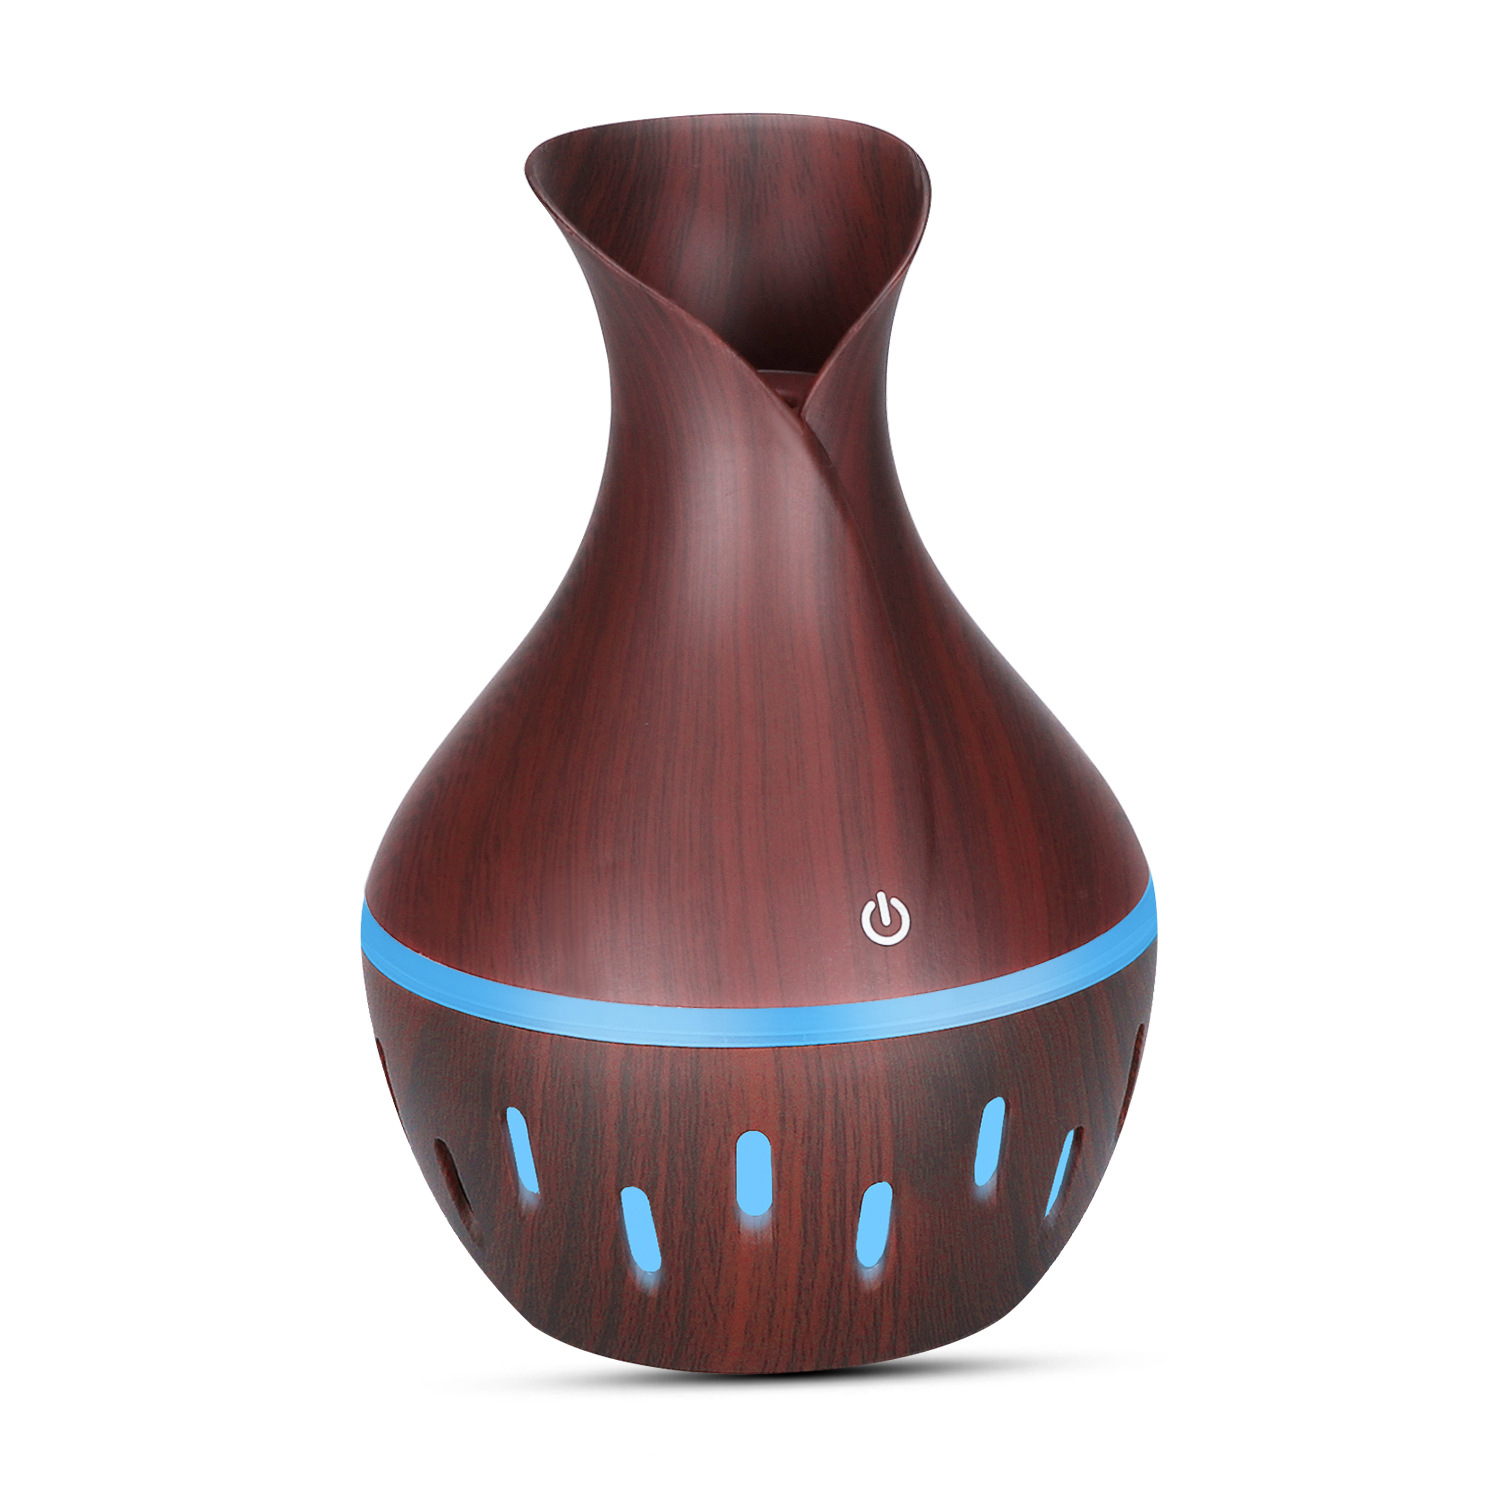 Supply ODM China Ultrasonic Atomizer 24V Victsing Essential Oil Diffuser